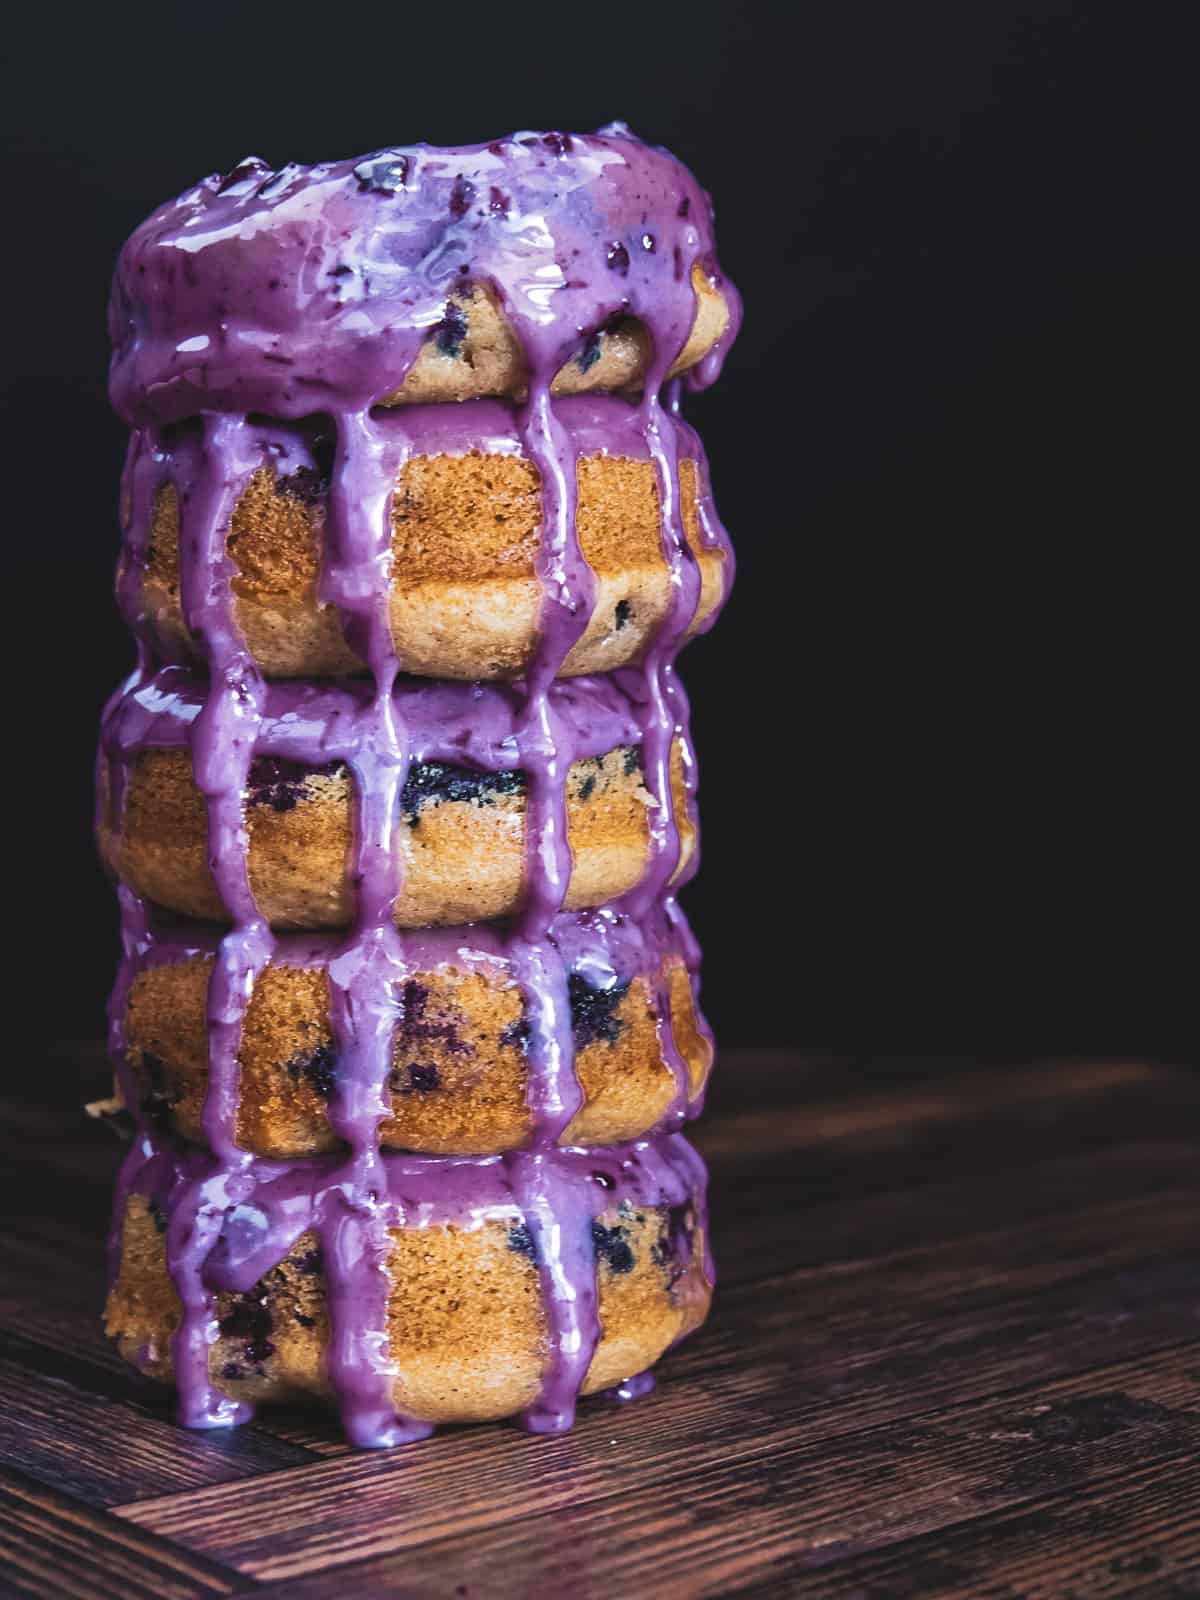 A stack of 5 blueberry donuts with blueberry glaze pouring over them.